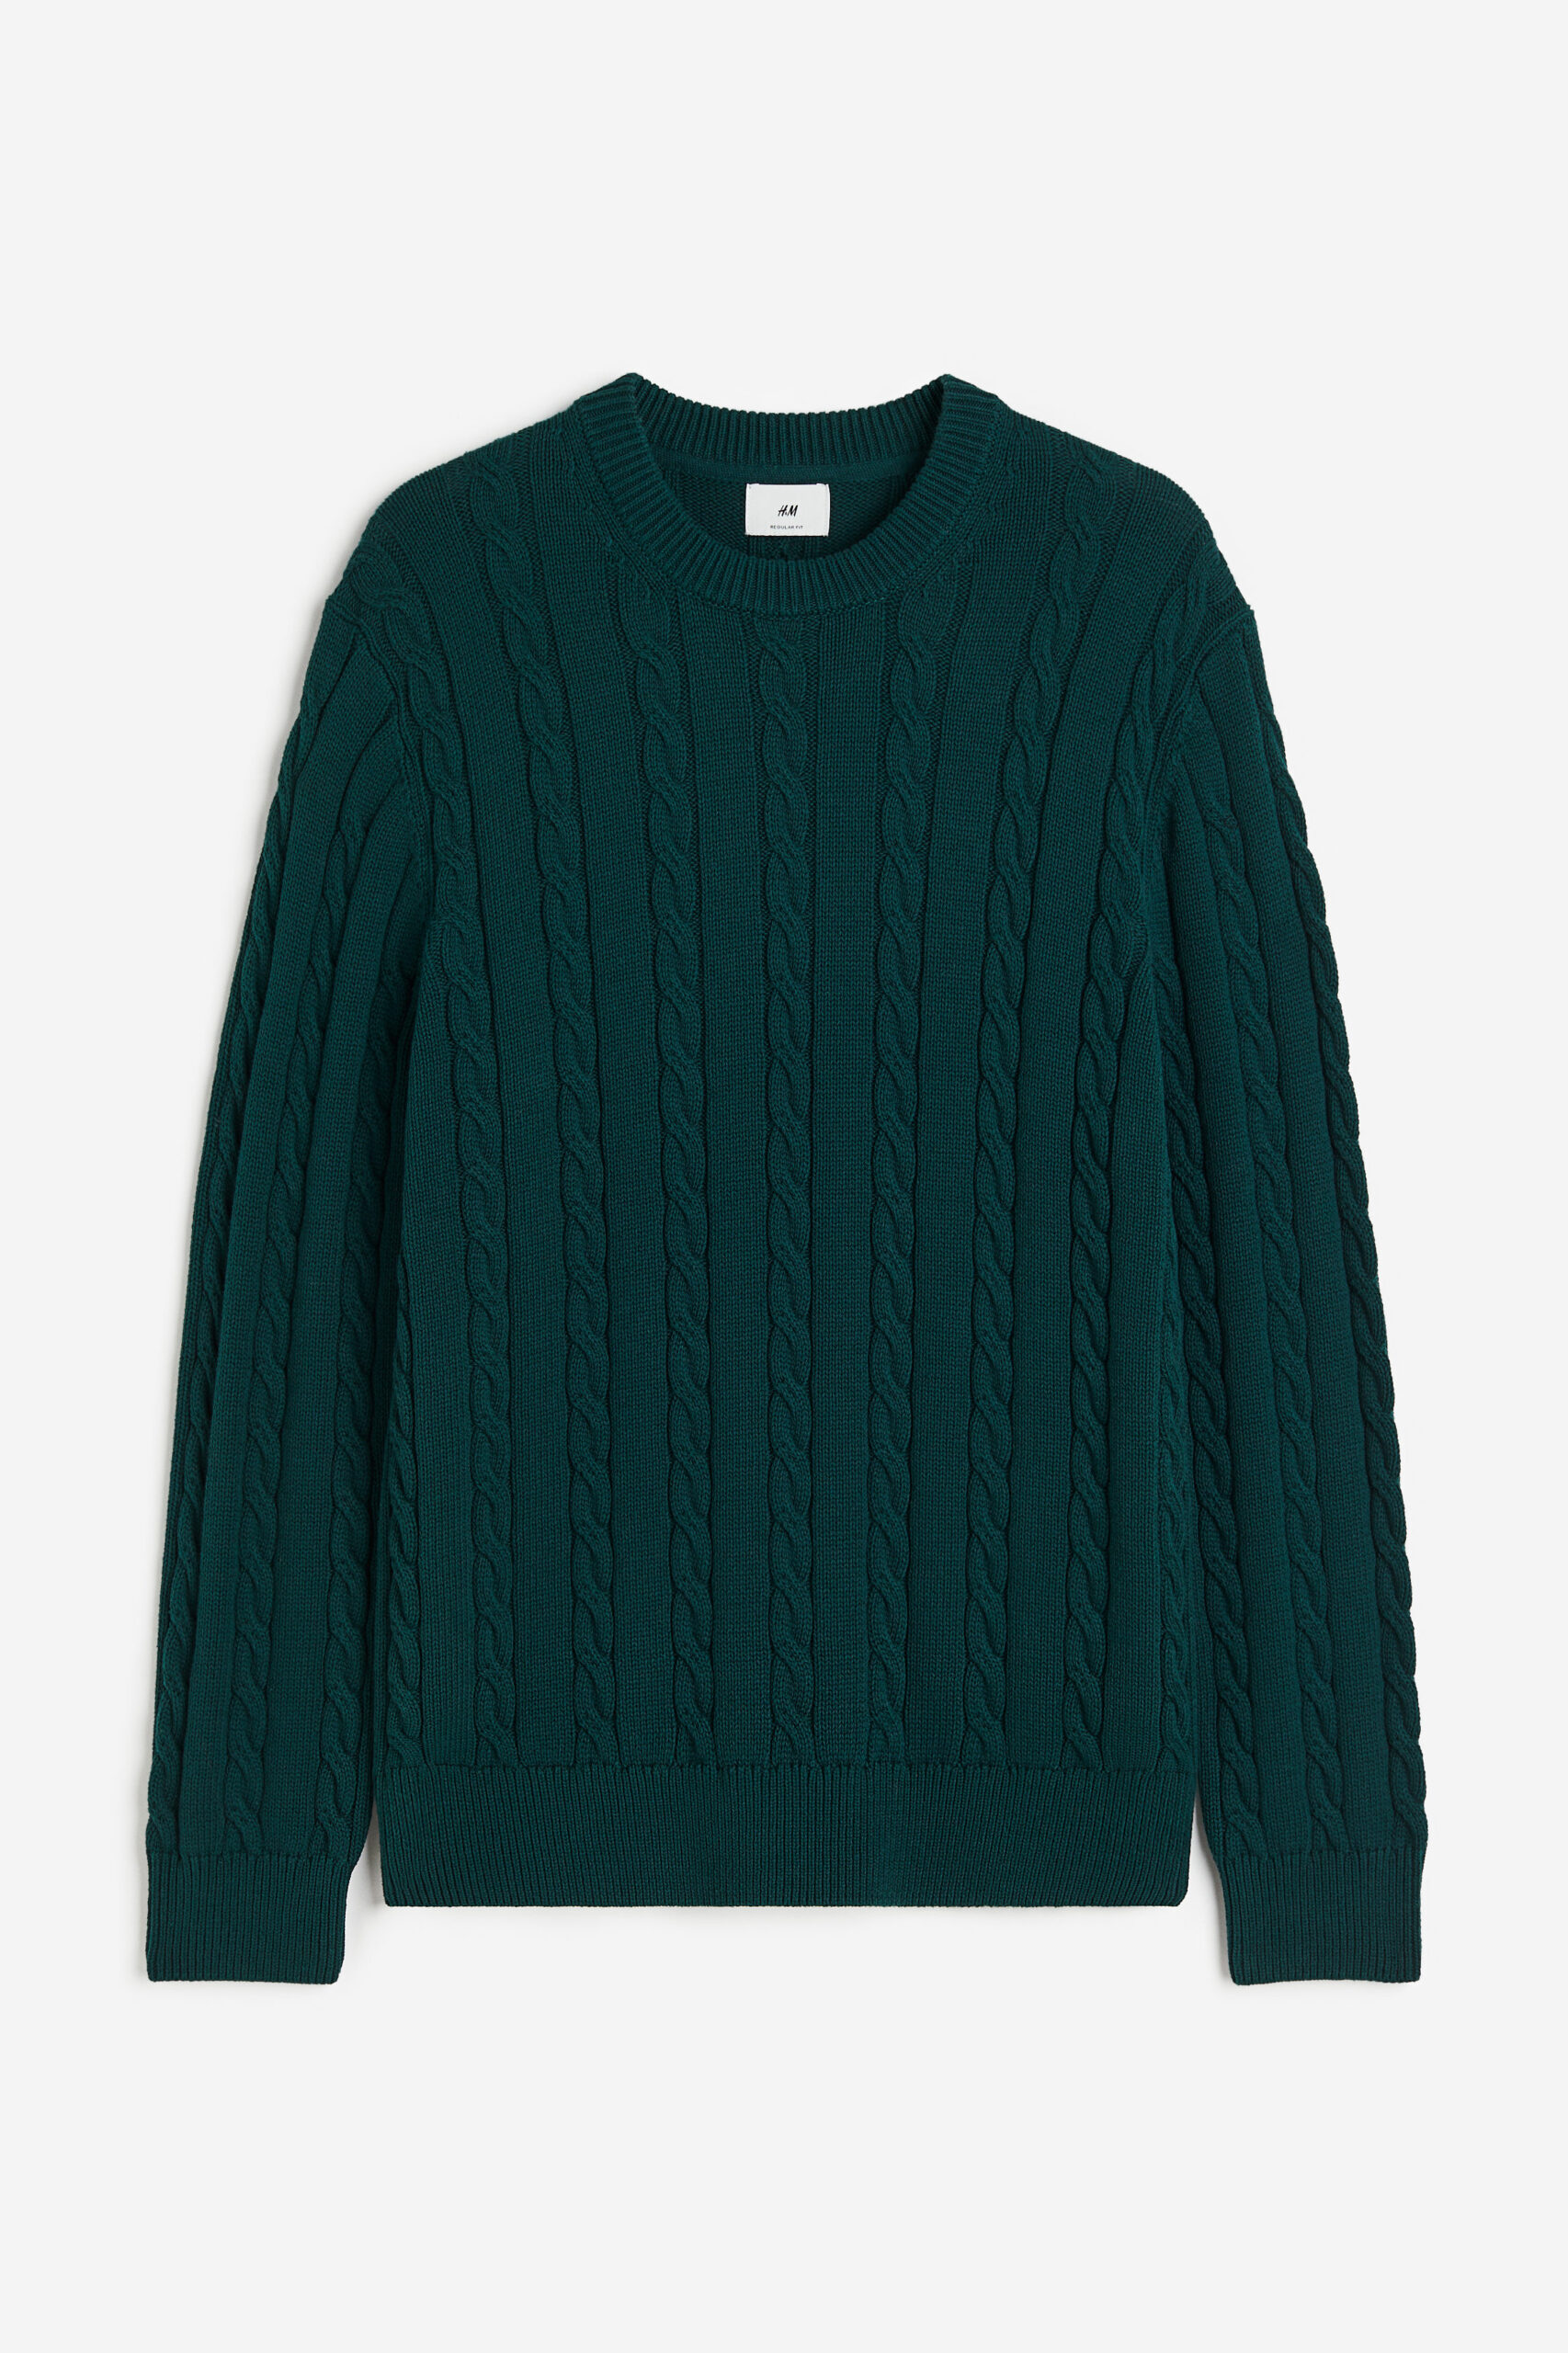 Mens forest green knit sweater.